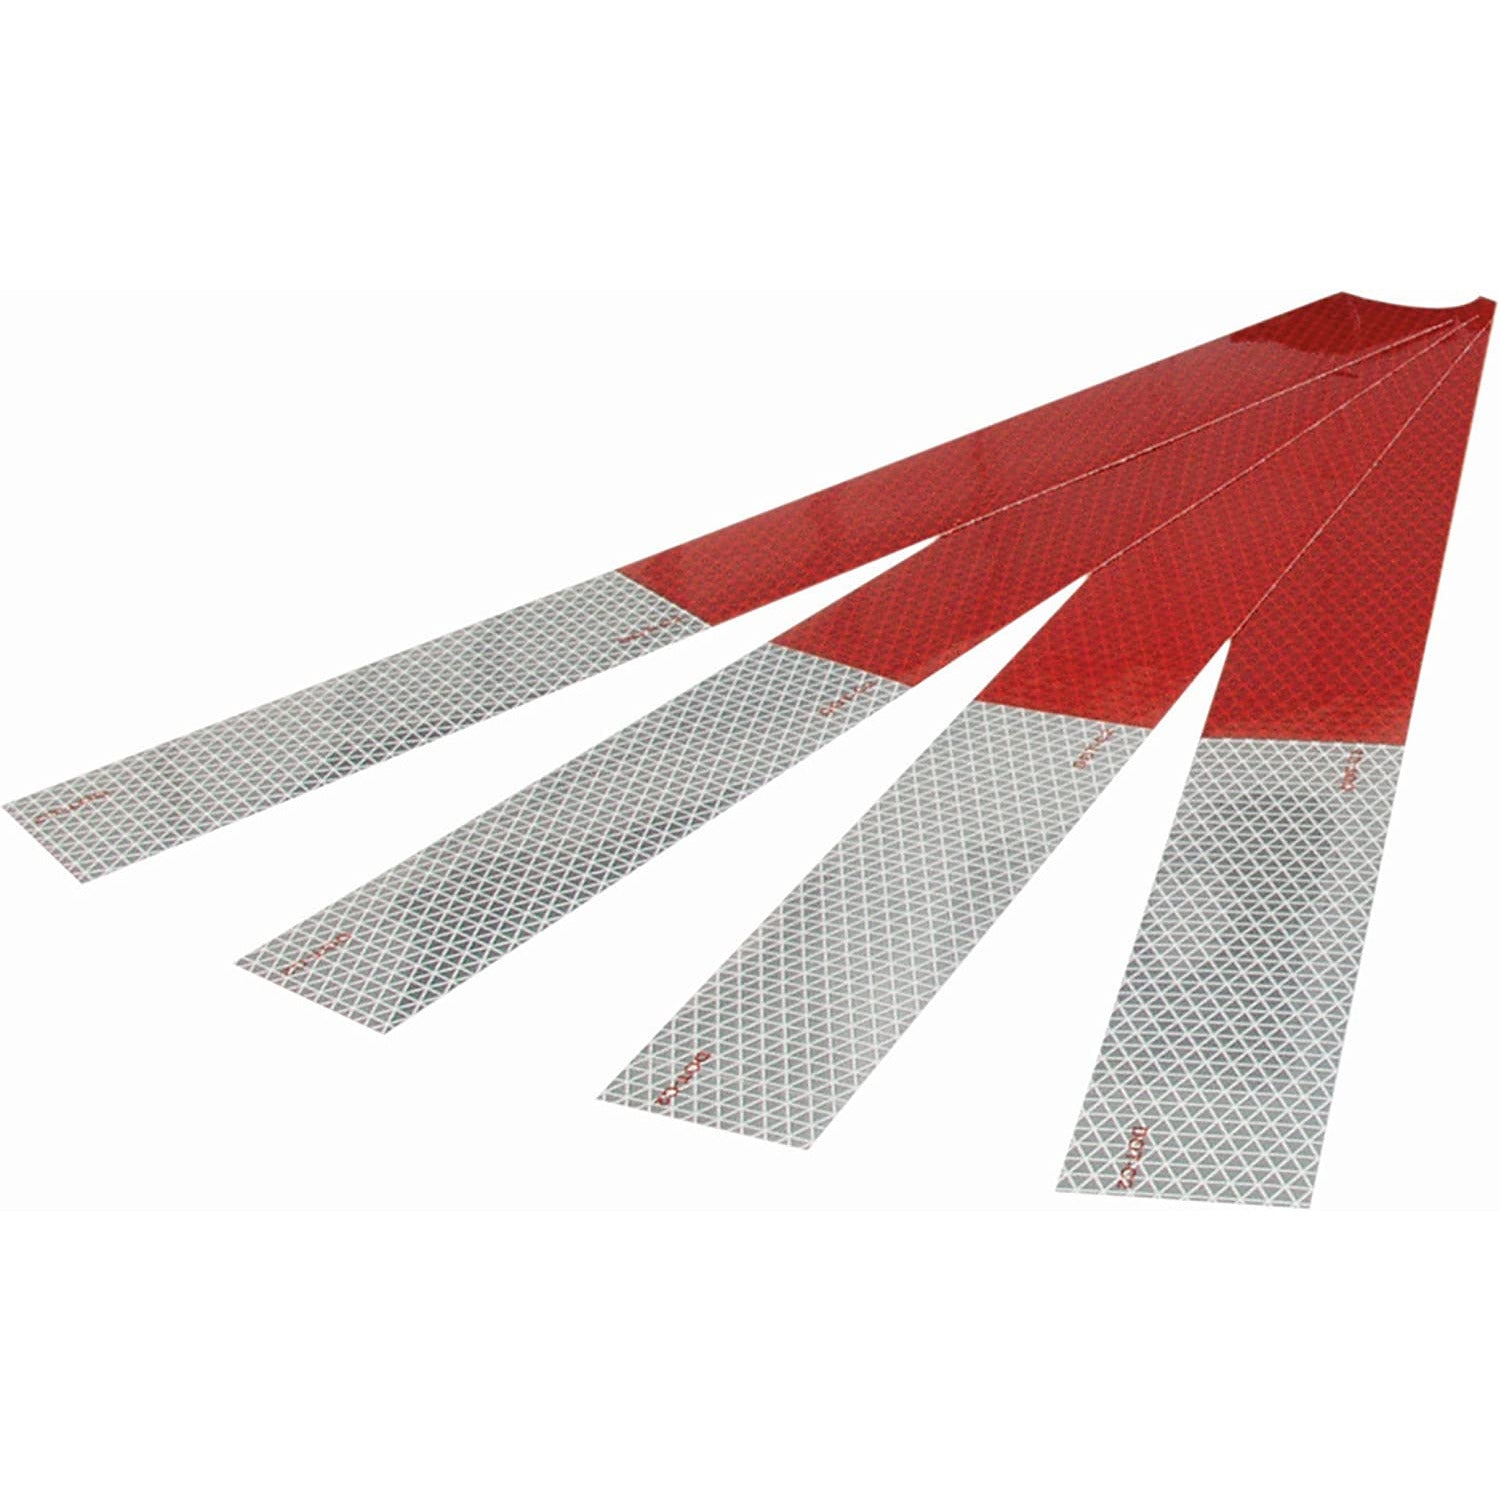 DLT RE418T Optronics Reflective Tape Kit (18", Red/Silver, Adhesive, 4pc)